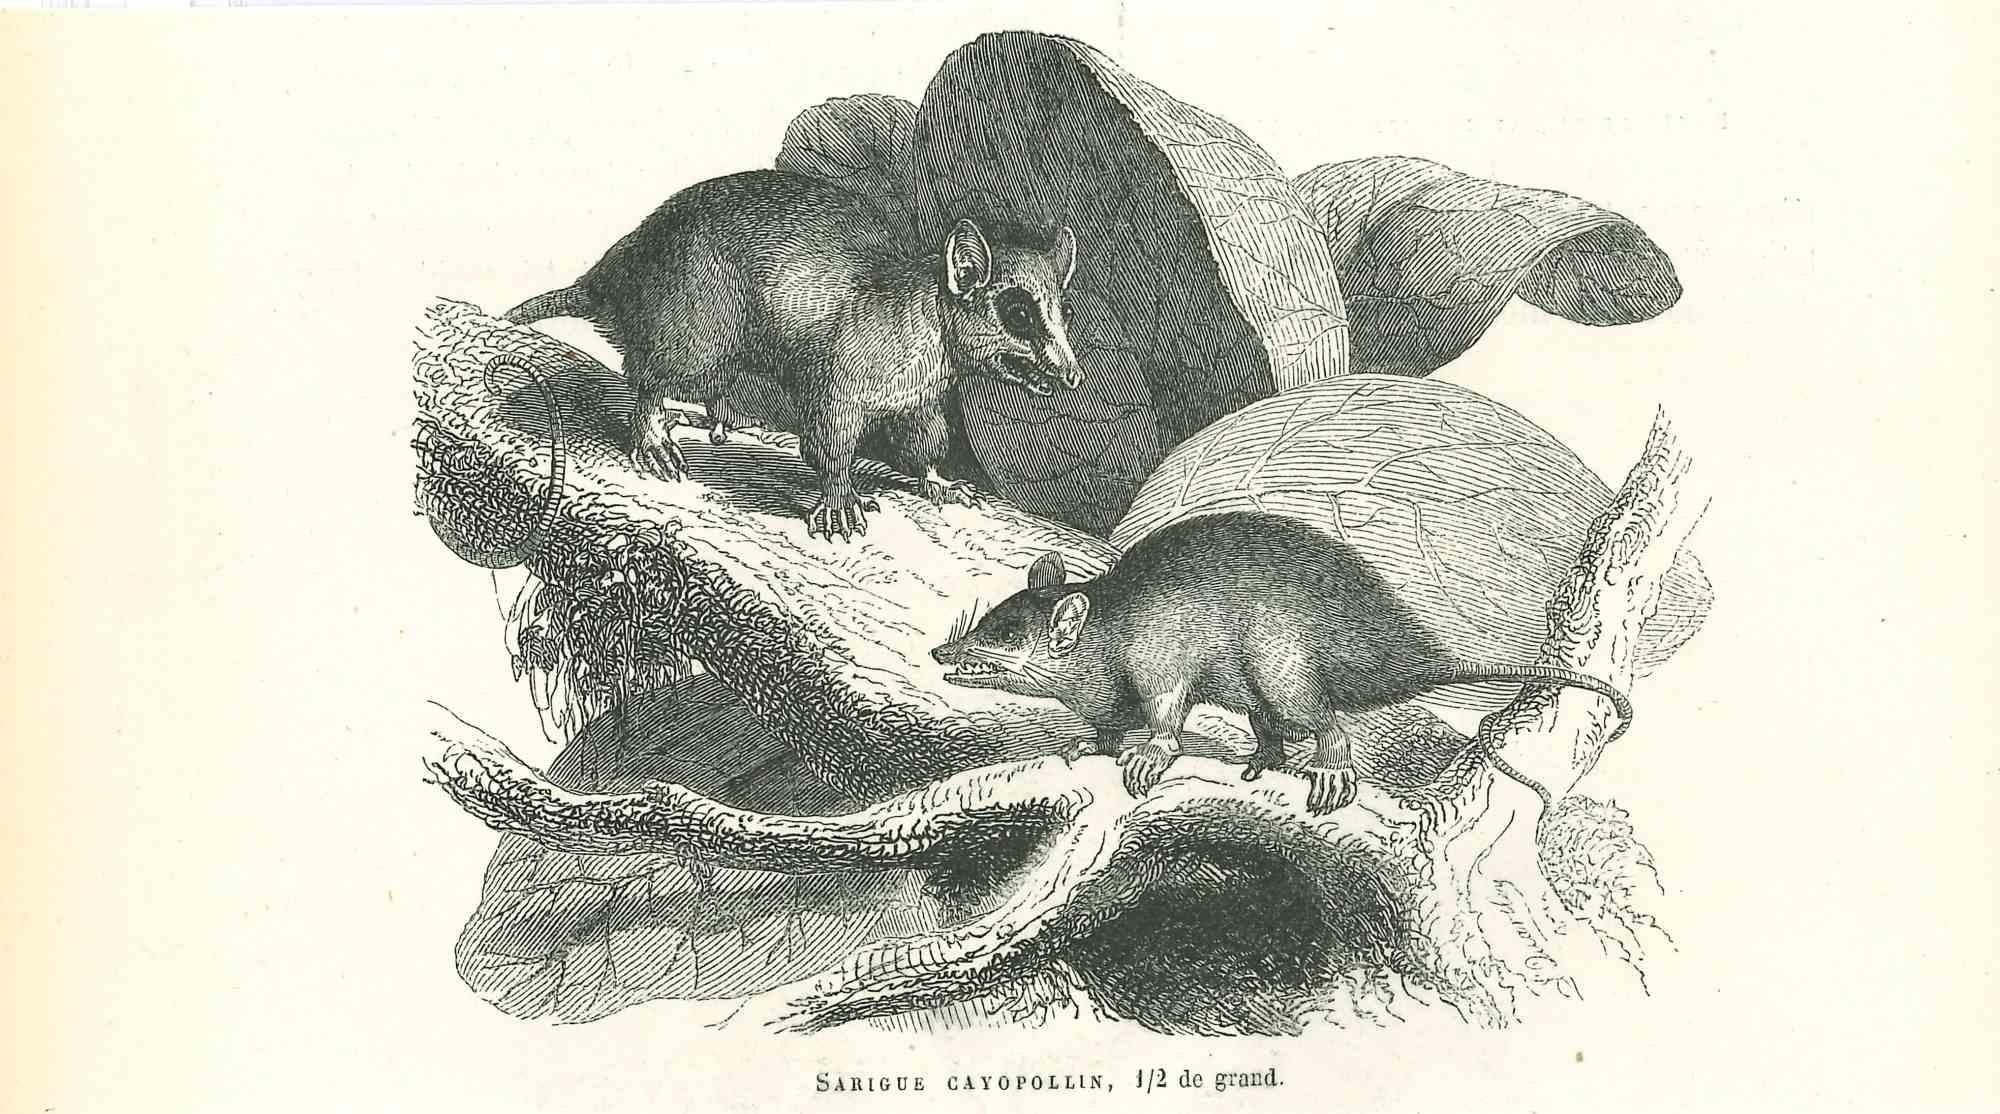 The Mouses - Original Lithograph by Paul Gervais - 1854